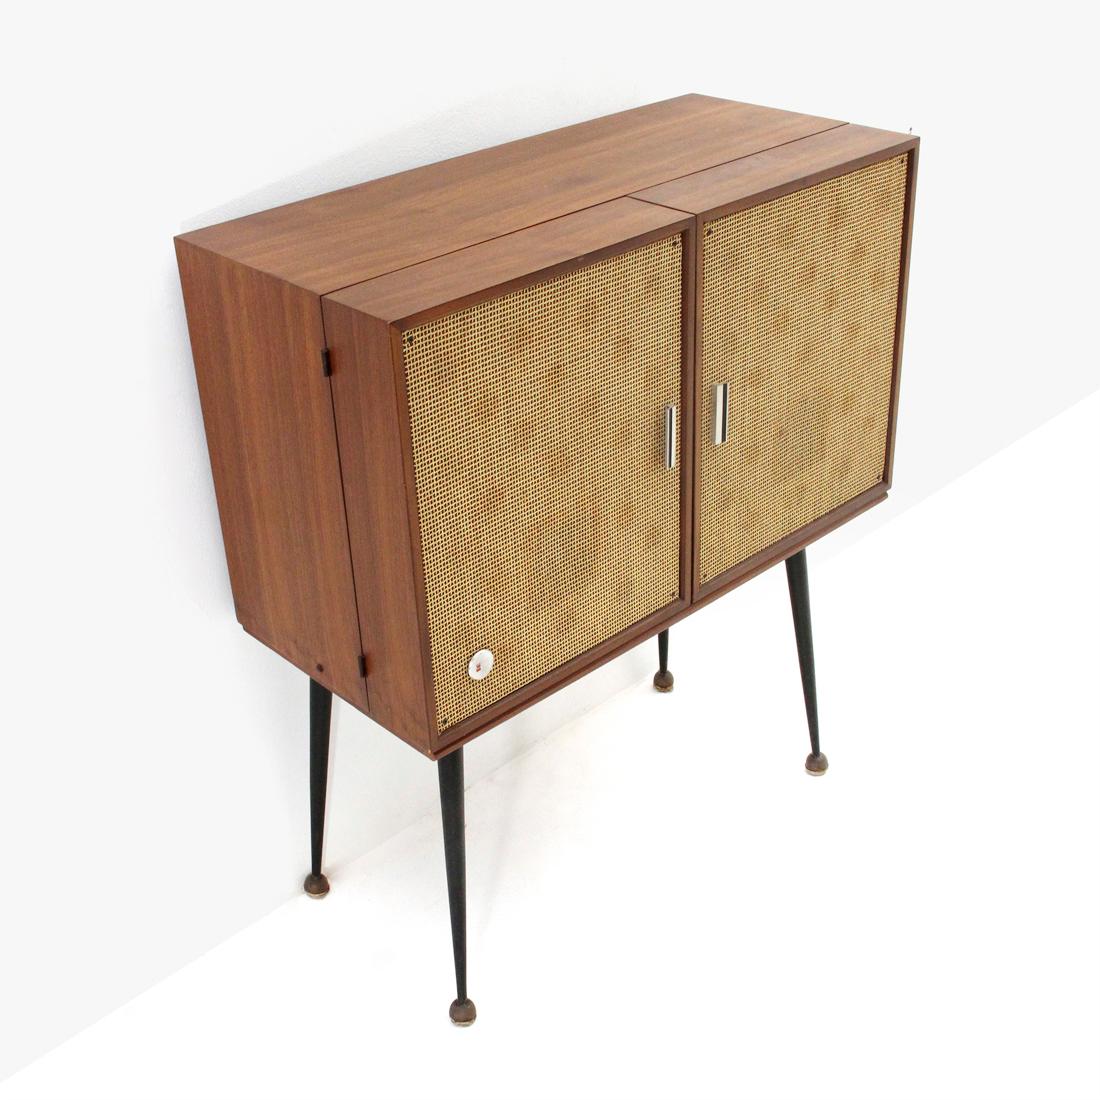 Mobile stereo produced in Italy by Philco in the 1950s.
Structure in veneered wood.
Metal legs with brass foot.
Front openable cases.
Removable turntables.
Good general condition, turntable working, external output working only on a box, the